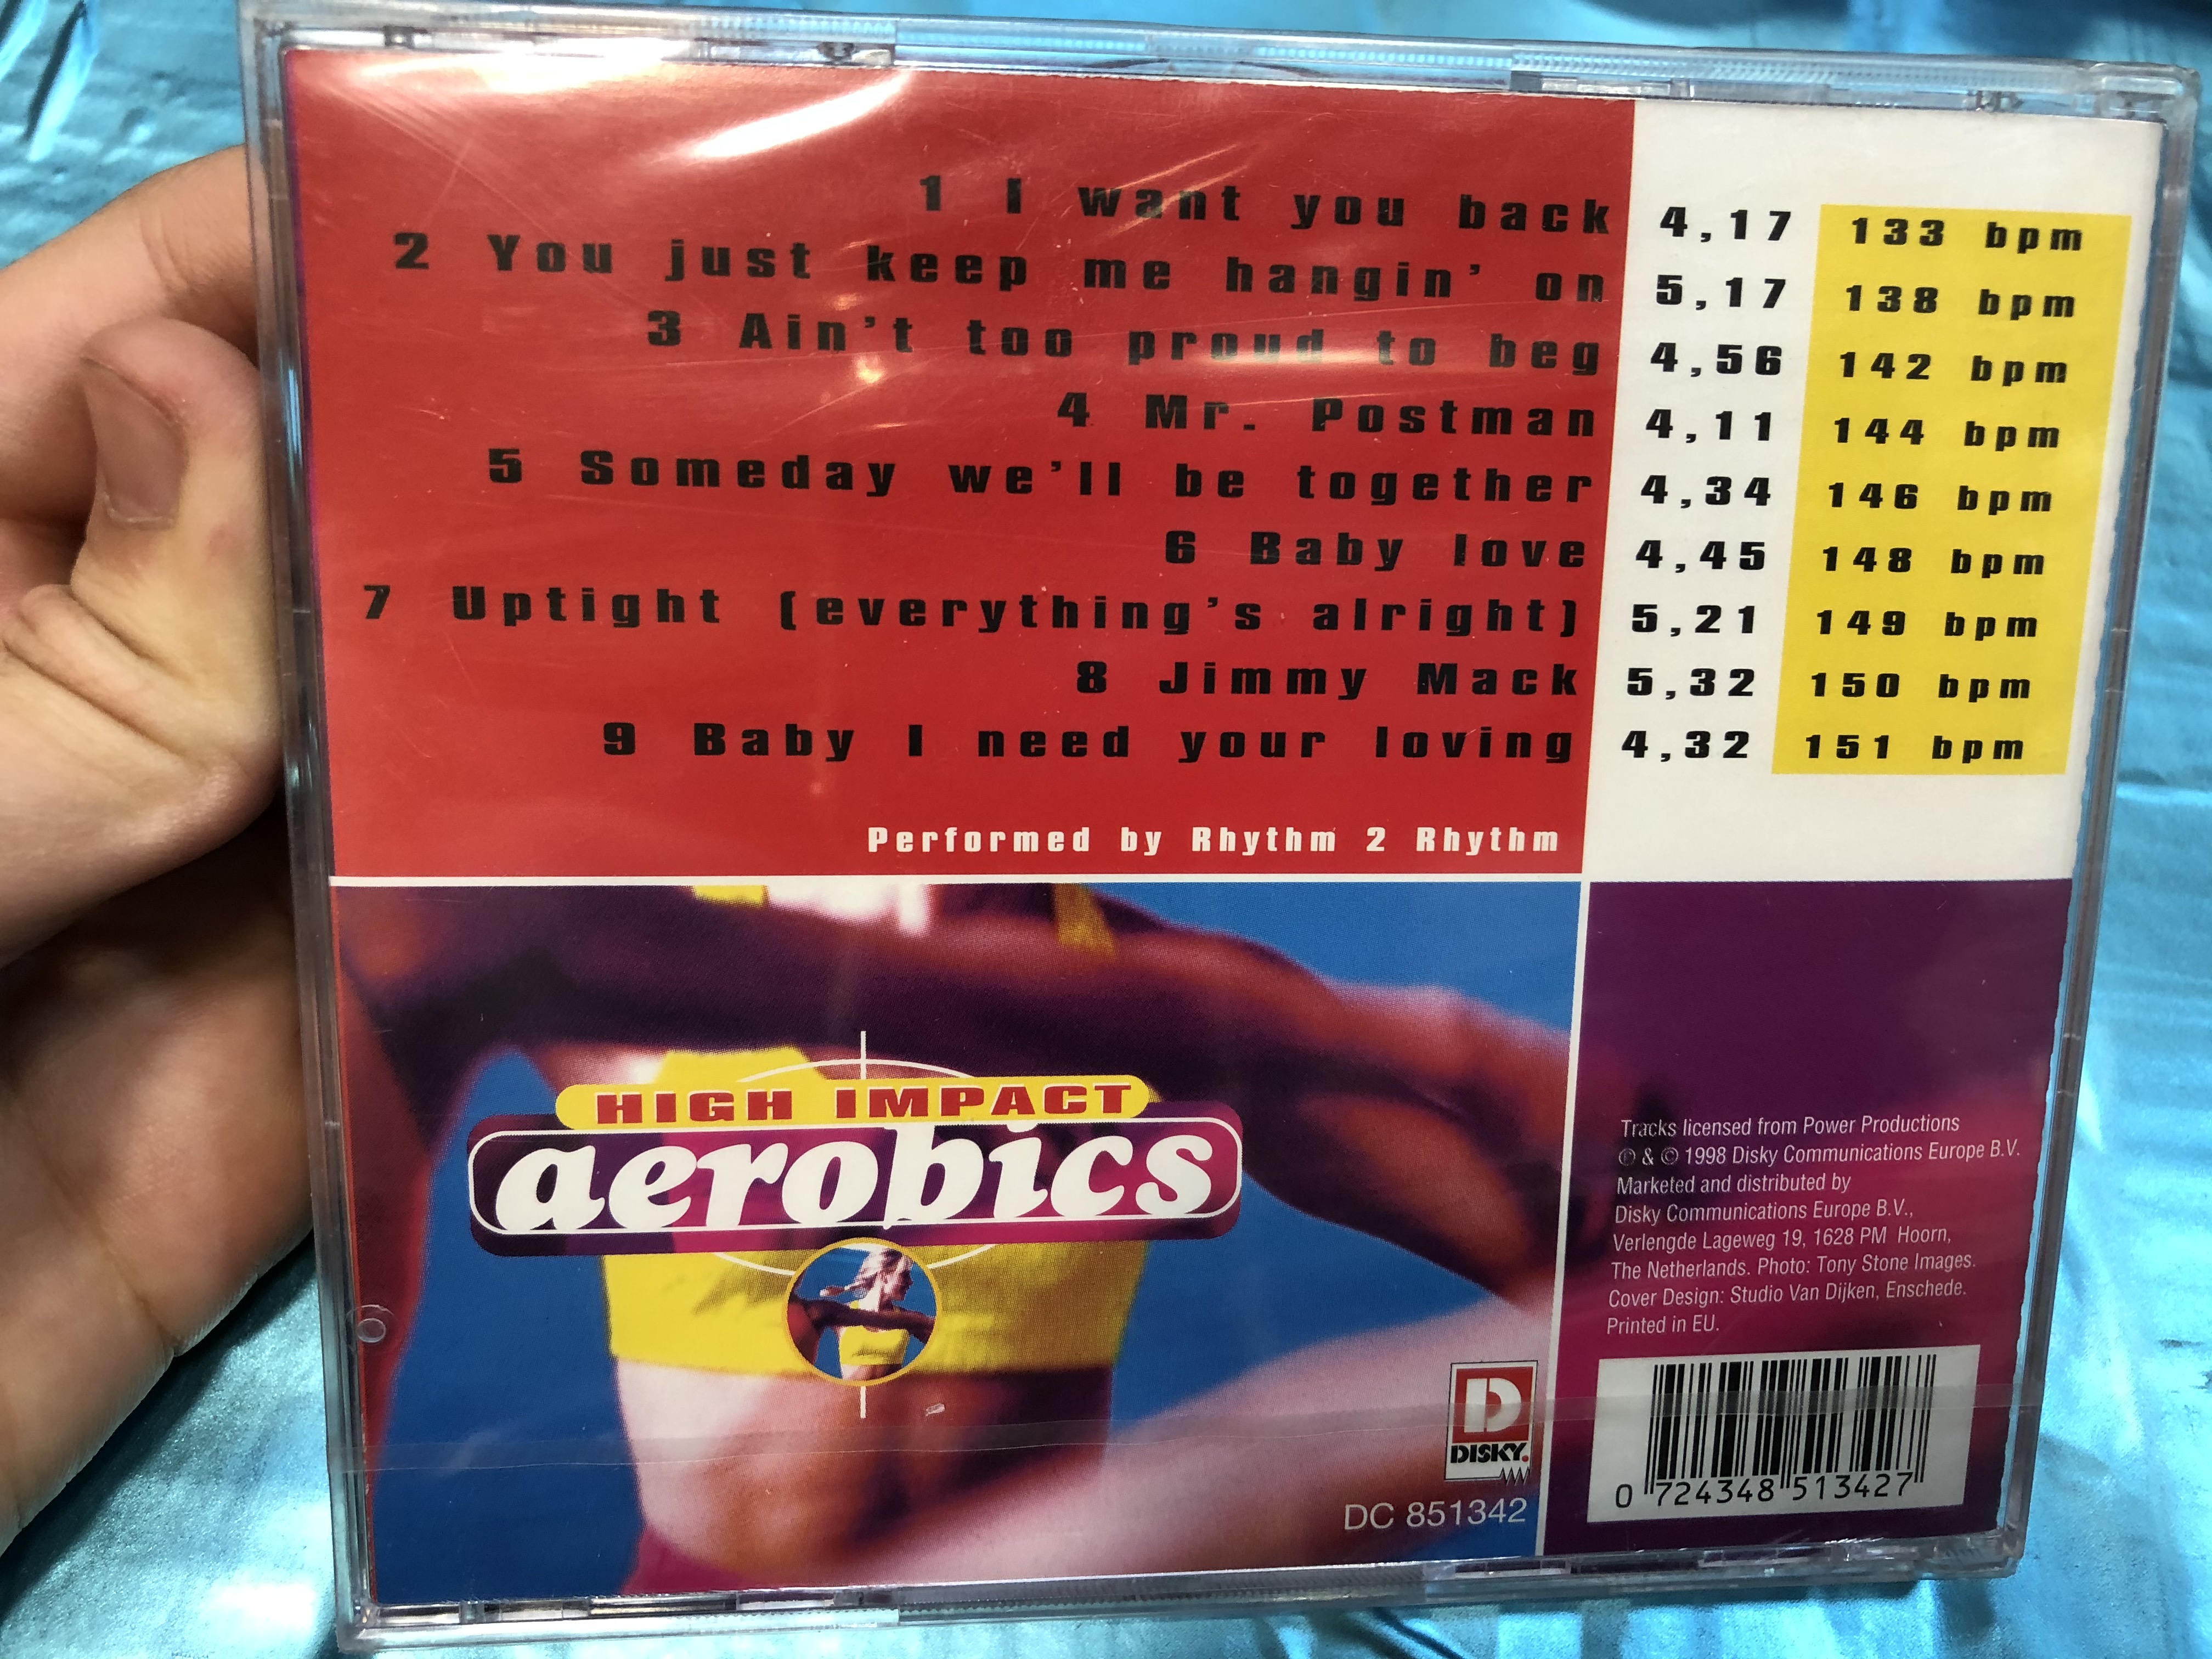 high-impact-aerobics-real-workout-music-including-free-workout-tips-disky-audio-cd-1998-dc-851342-3-.jpg